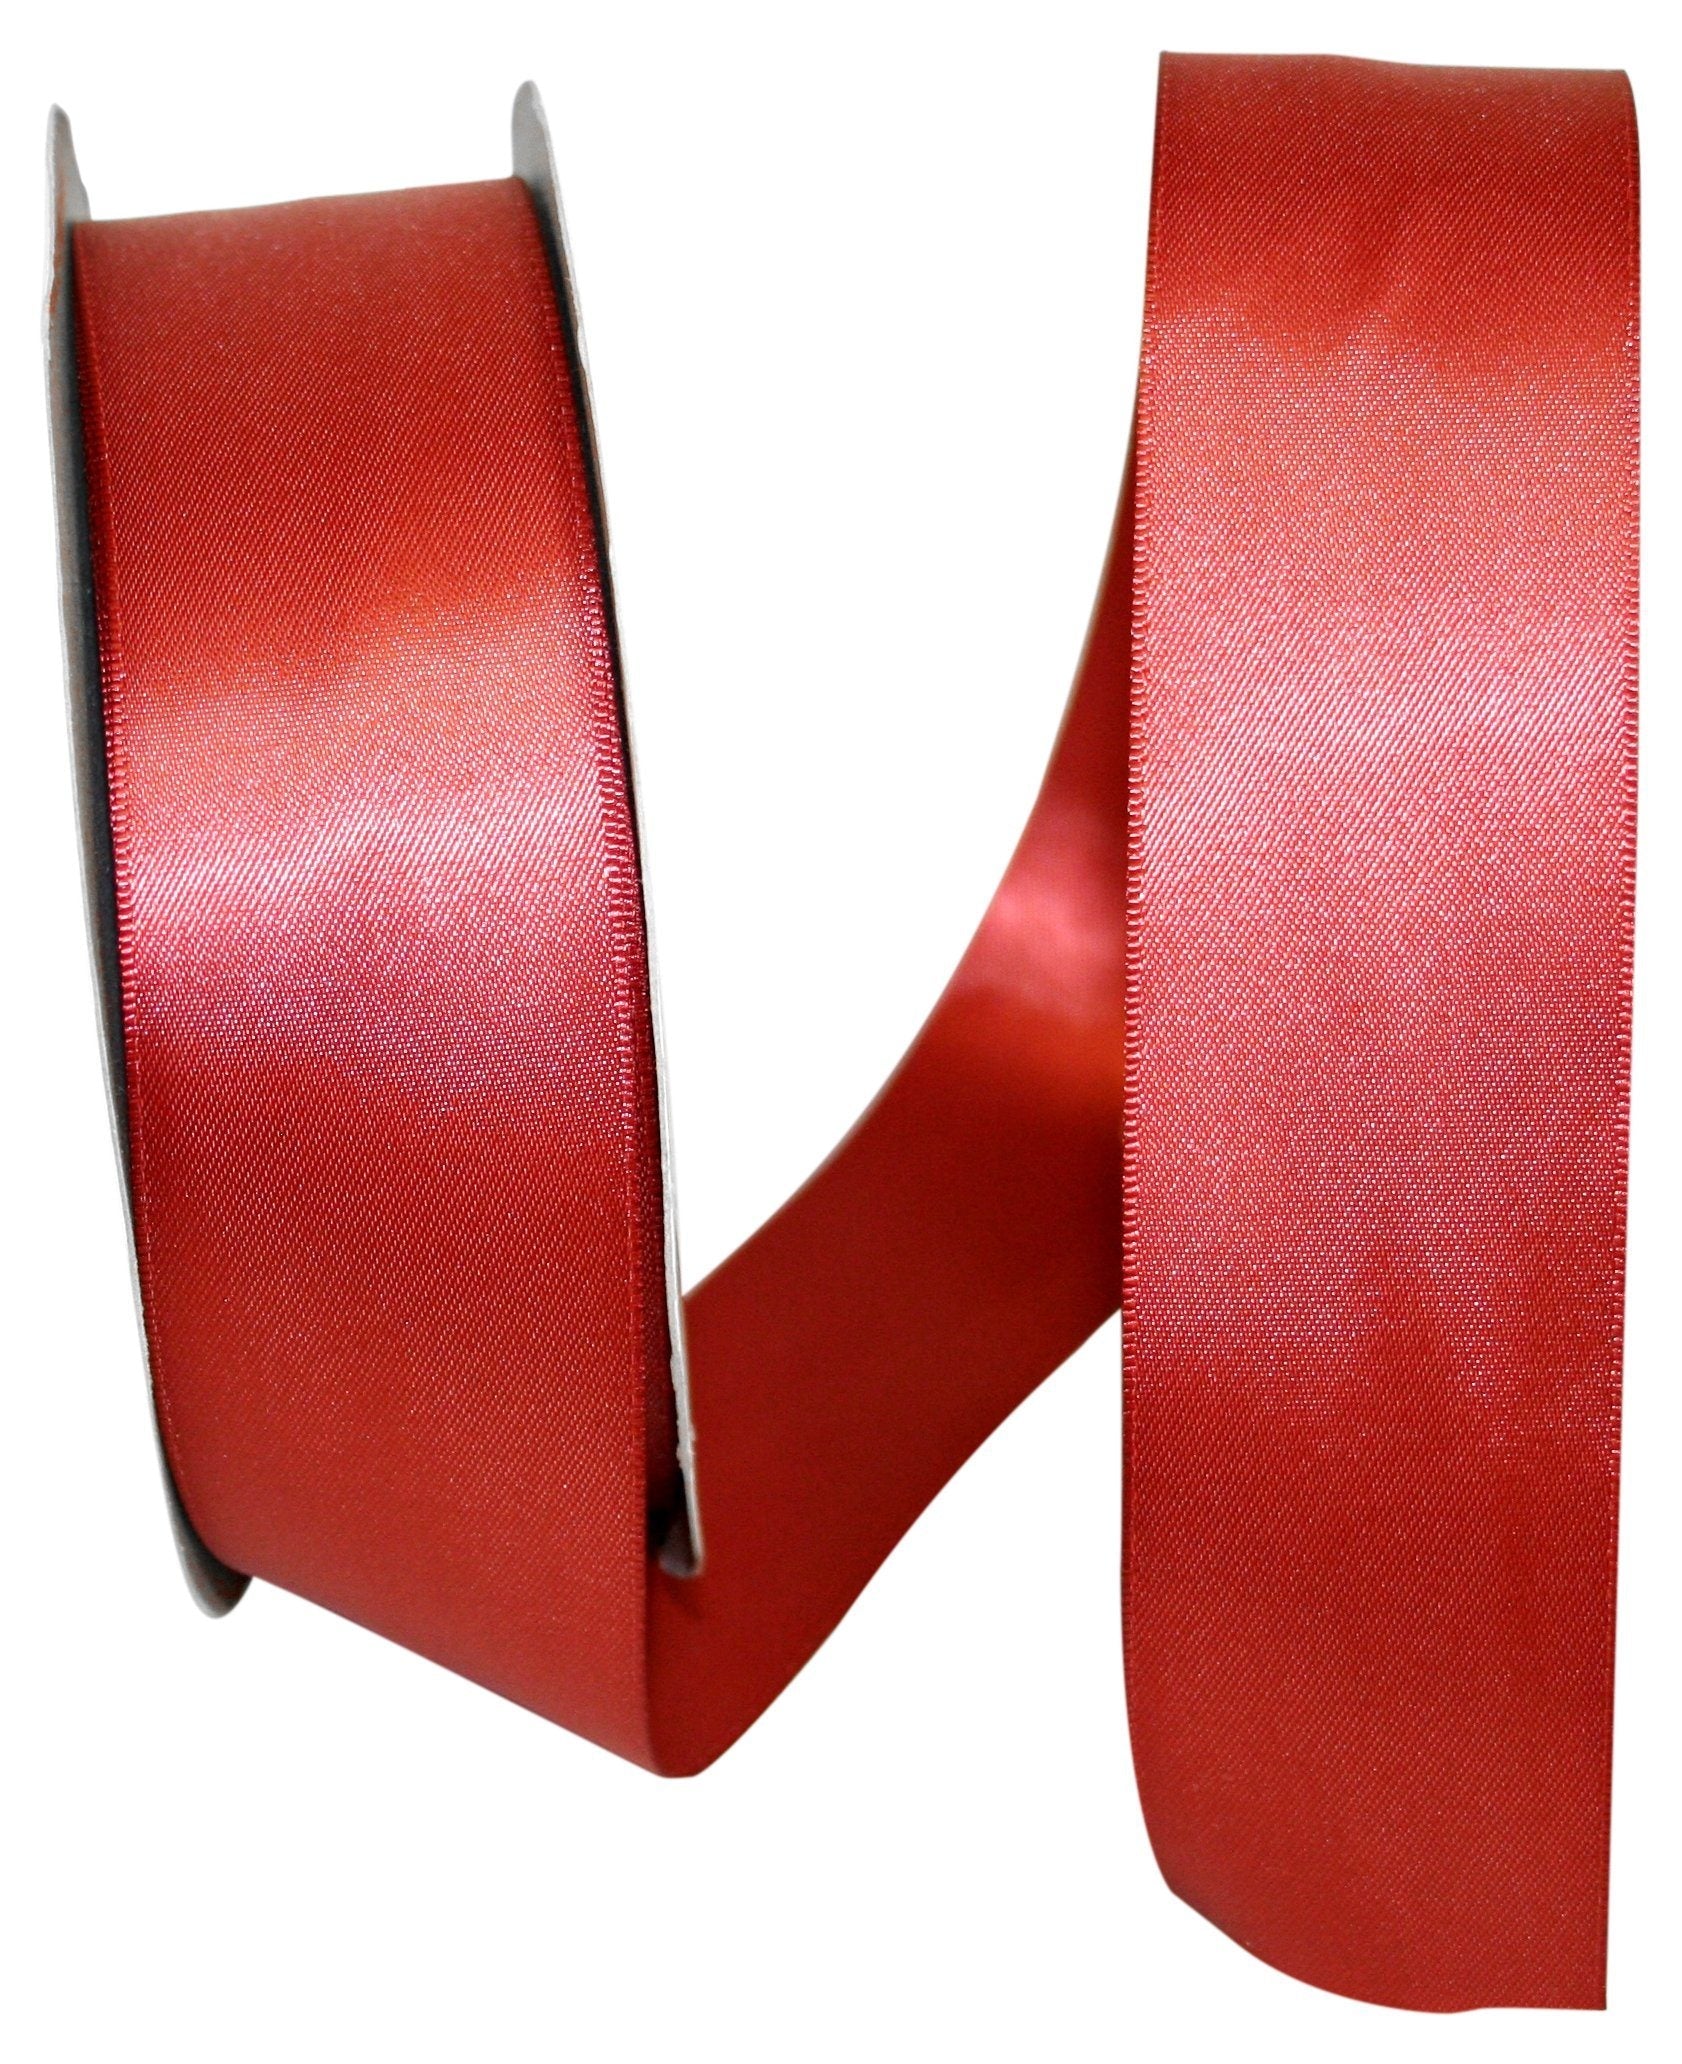 Double Faced Satin Ribbon, 2-1/2-Inch, 50 Yards (Red)